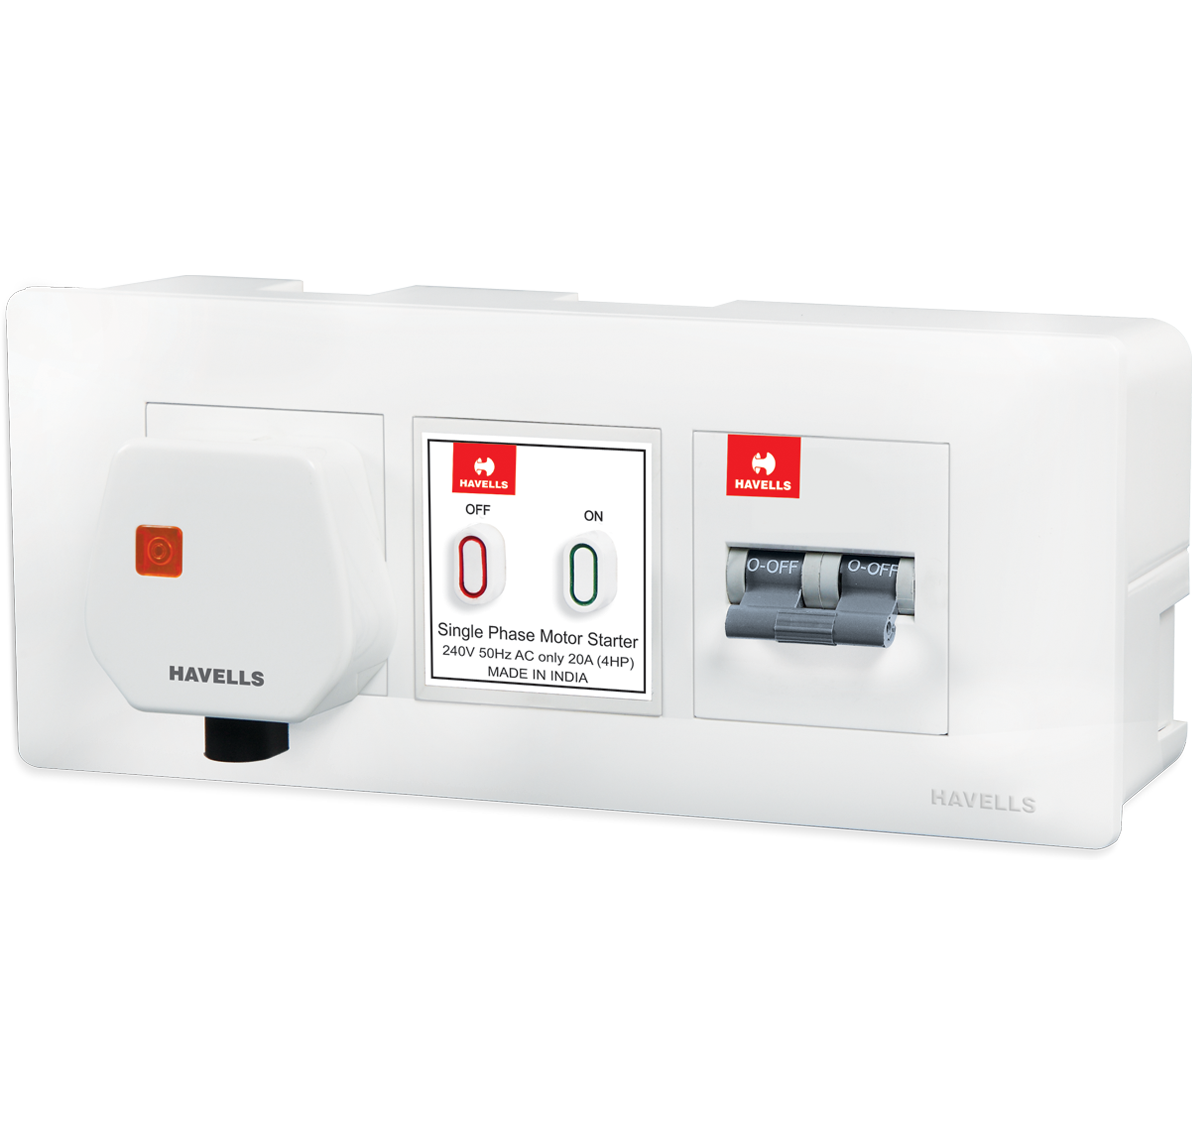 DBOXx MCB Protected Power Unit